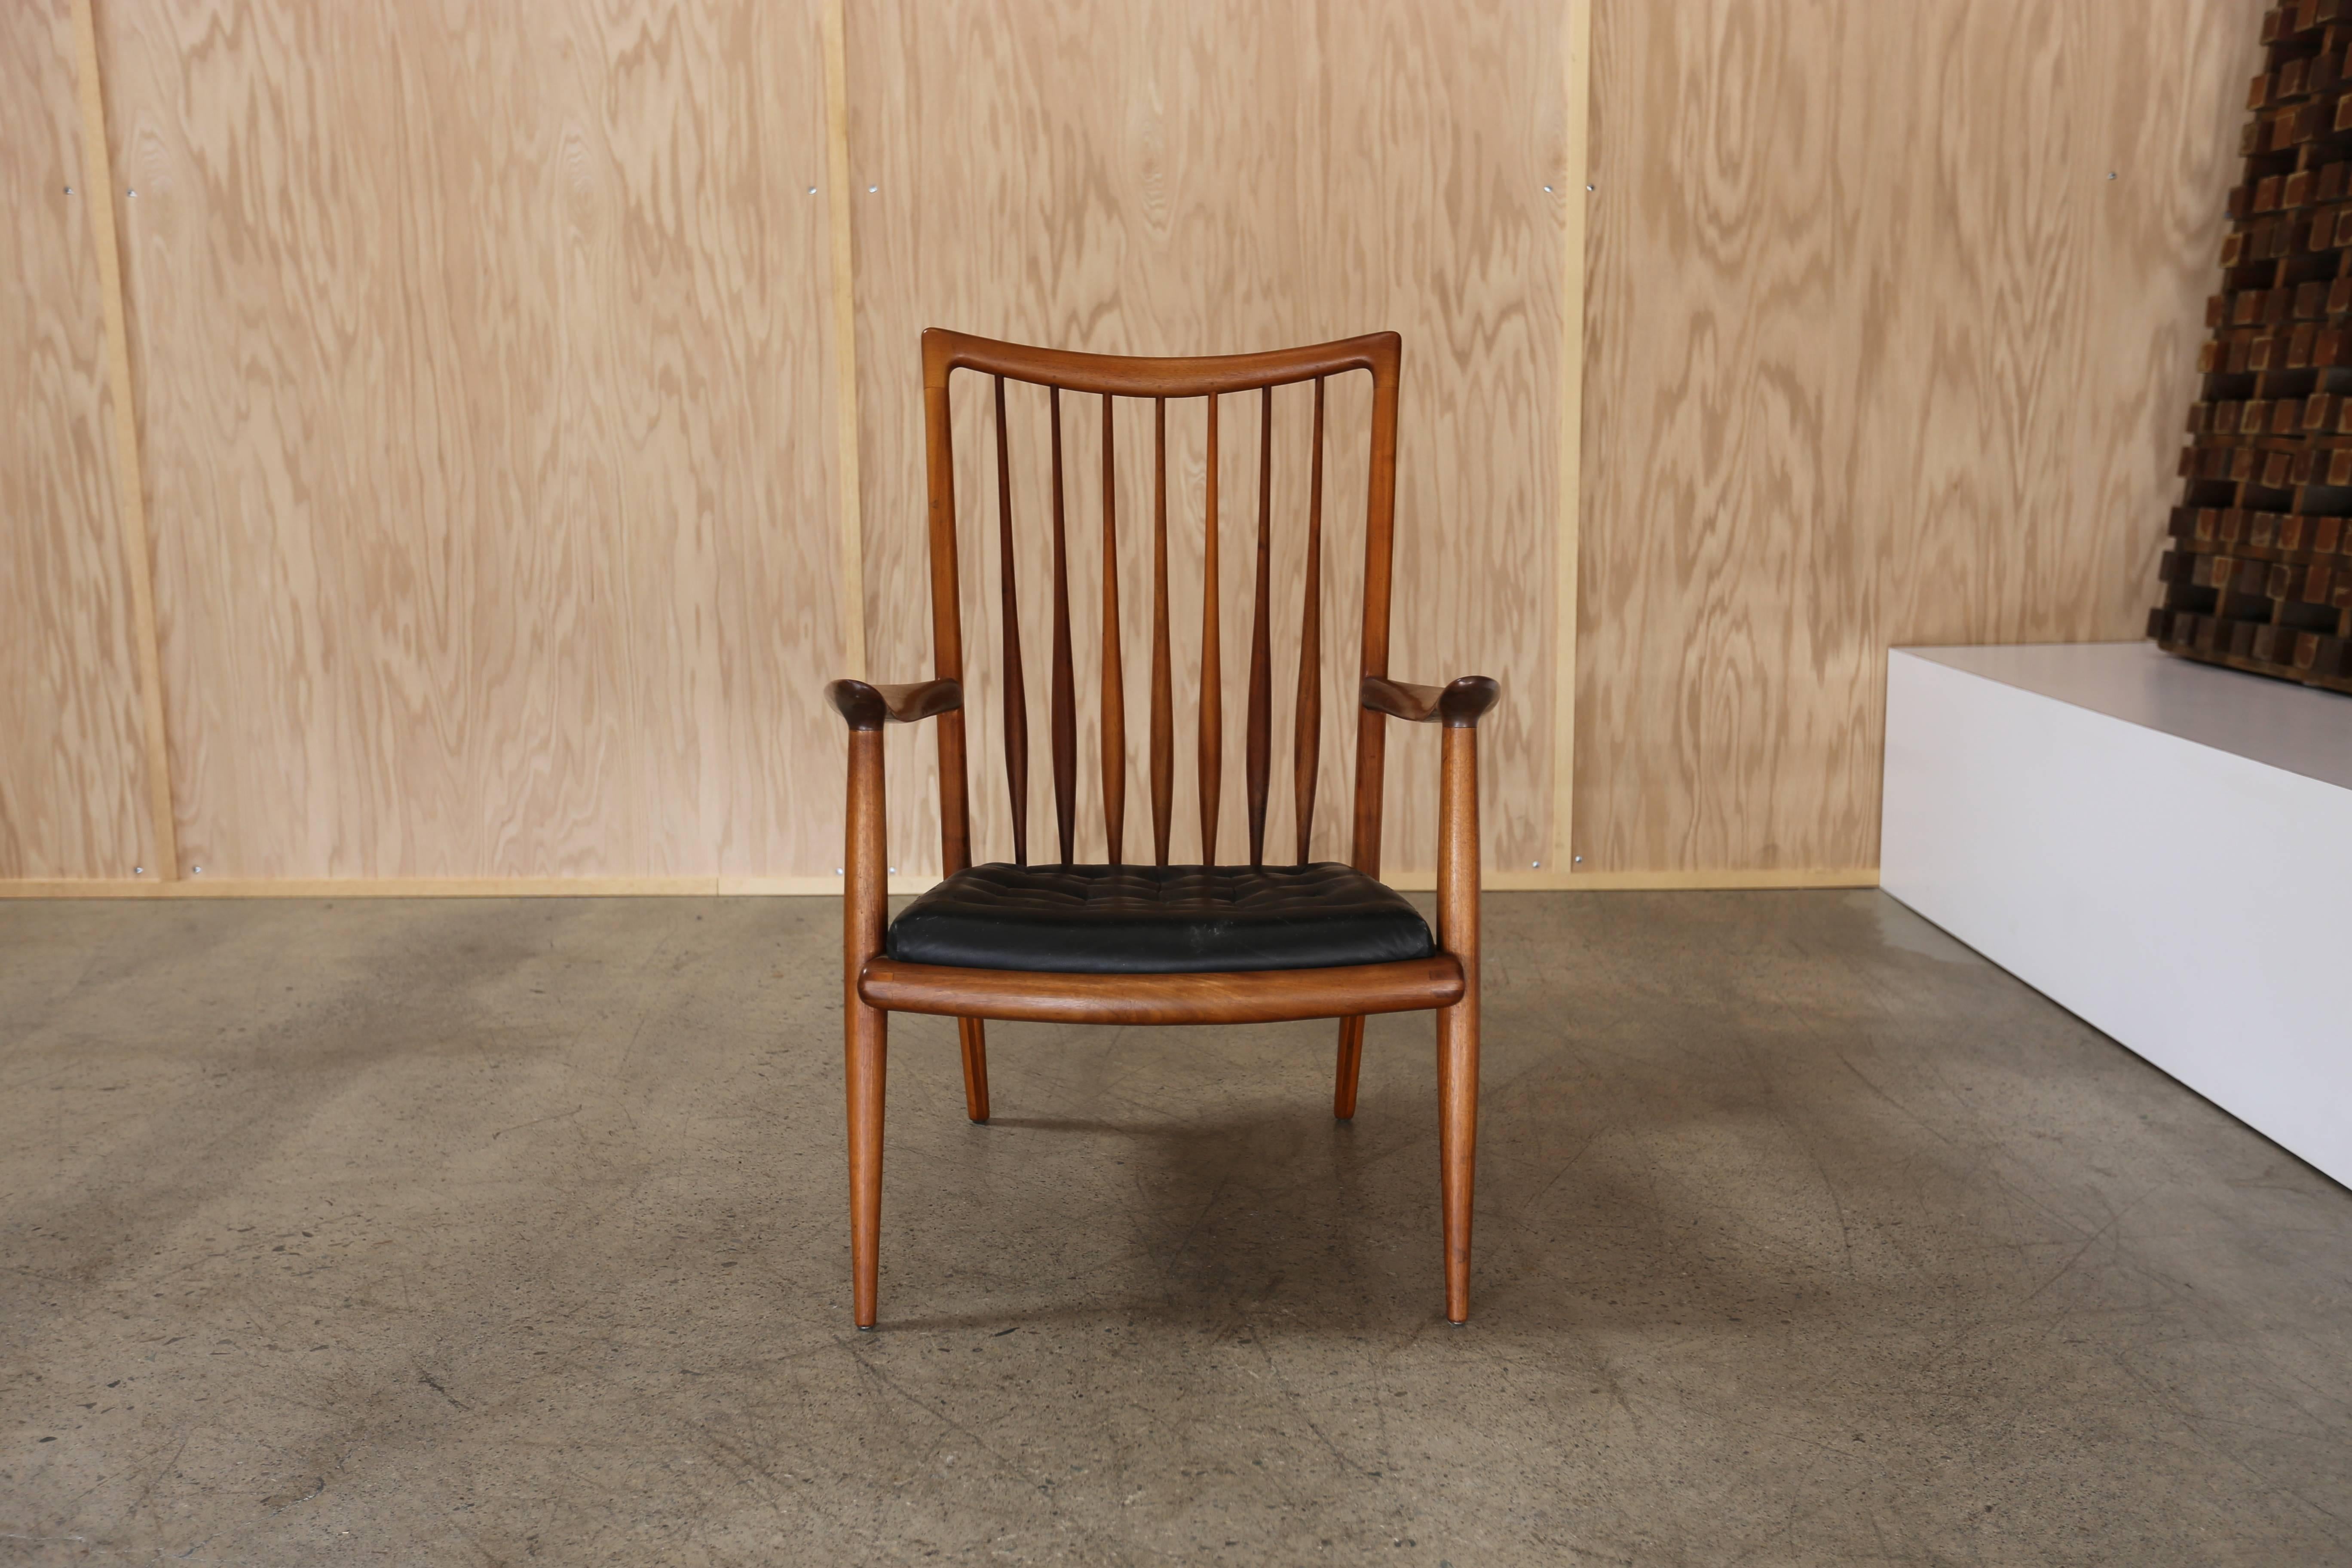 Handcrafted lounge chair by California modern woodworker Sam Maloof. This piece is branded to the bottom.